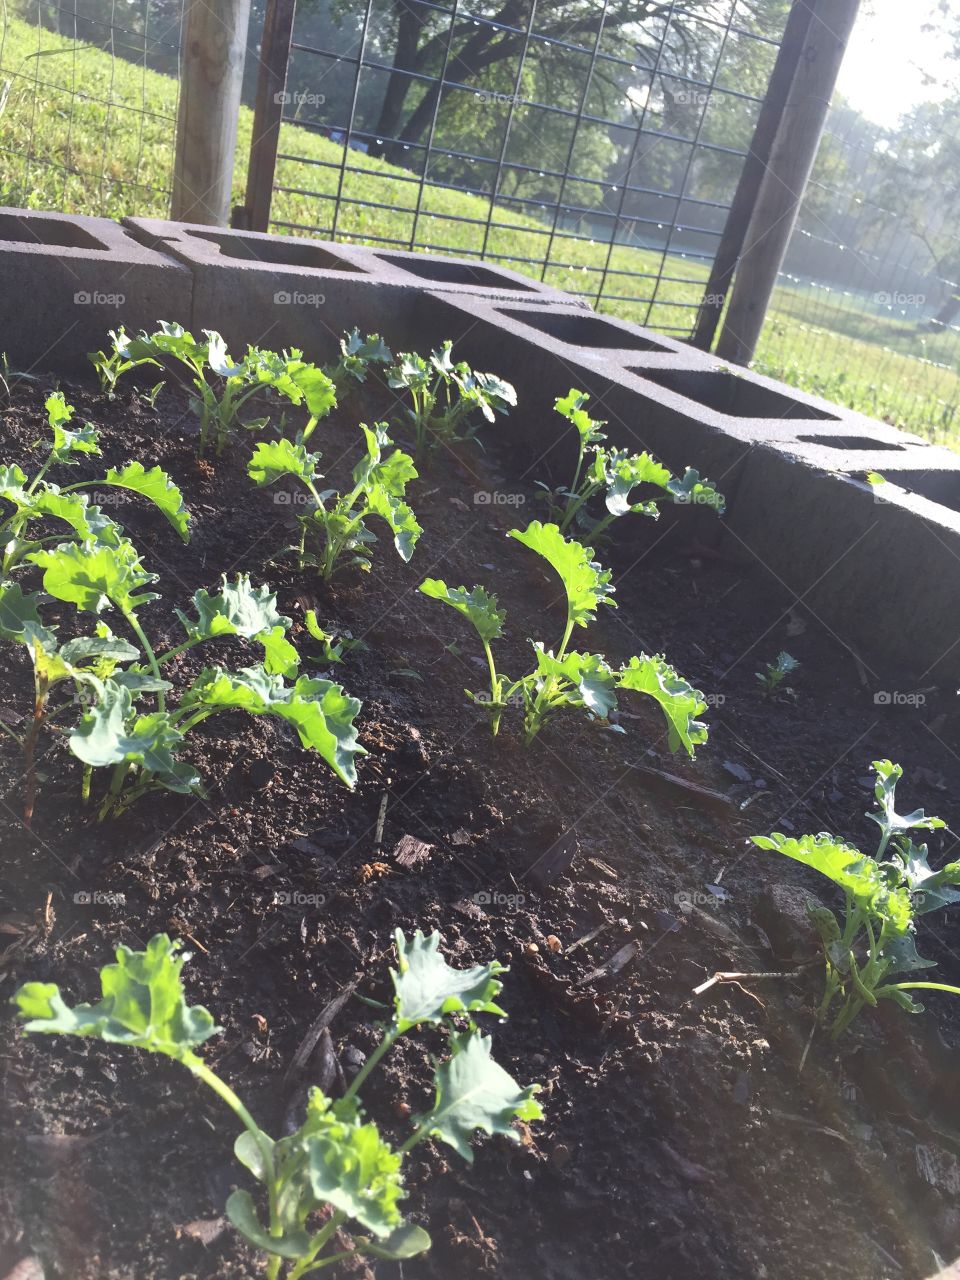 Baby kale plants in a raised garden bed, enclosed by a wire-fenced area and backlit by early morning light on a hazy spring morning 